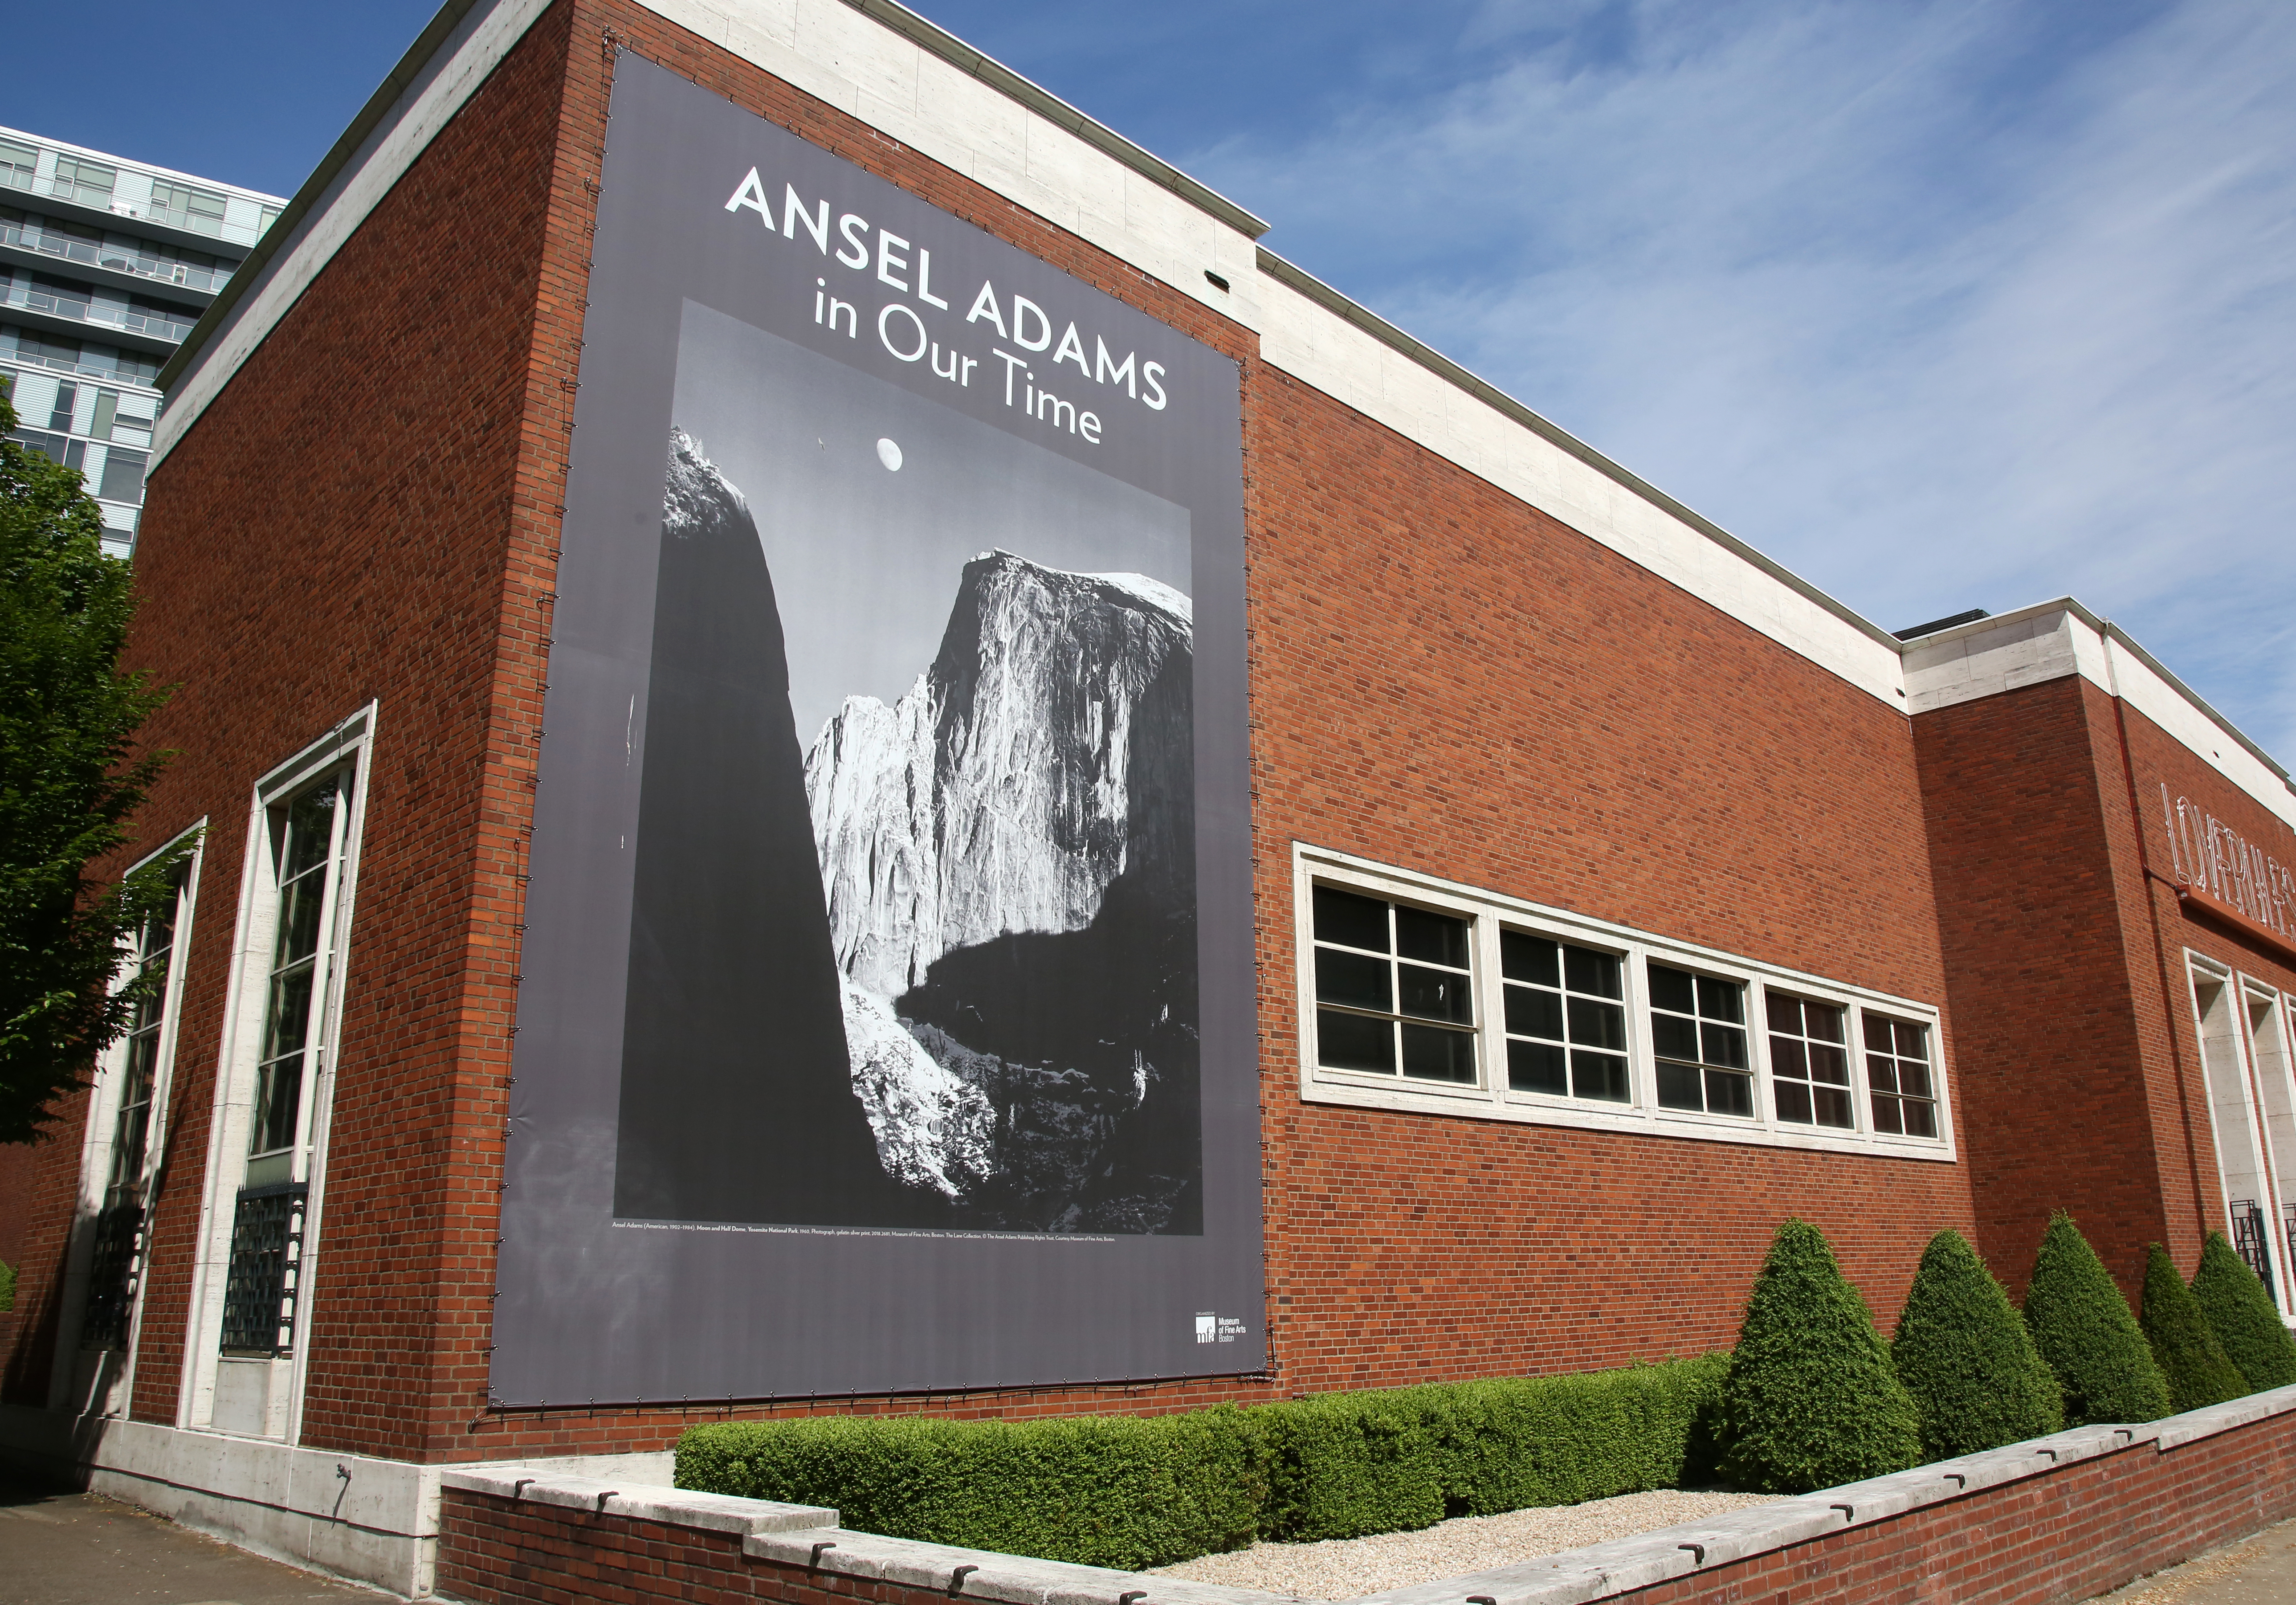 The Story of Moon and Half Dome - The Ansel Adams Gallery